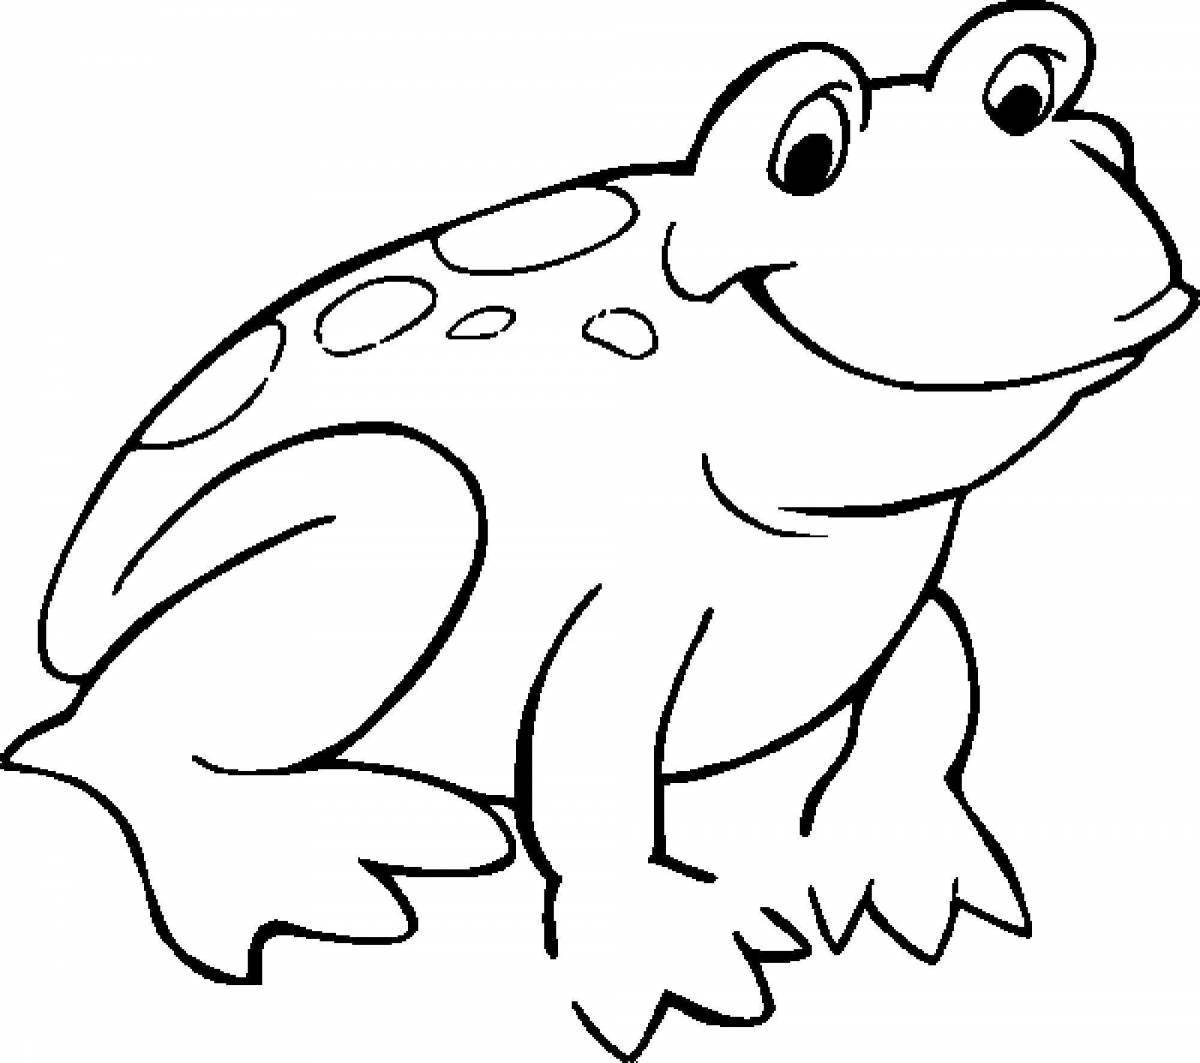 Funny animal coloring pages for kids 2-3 years old